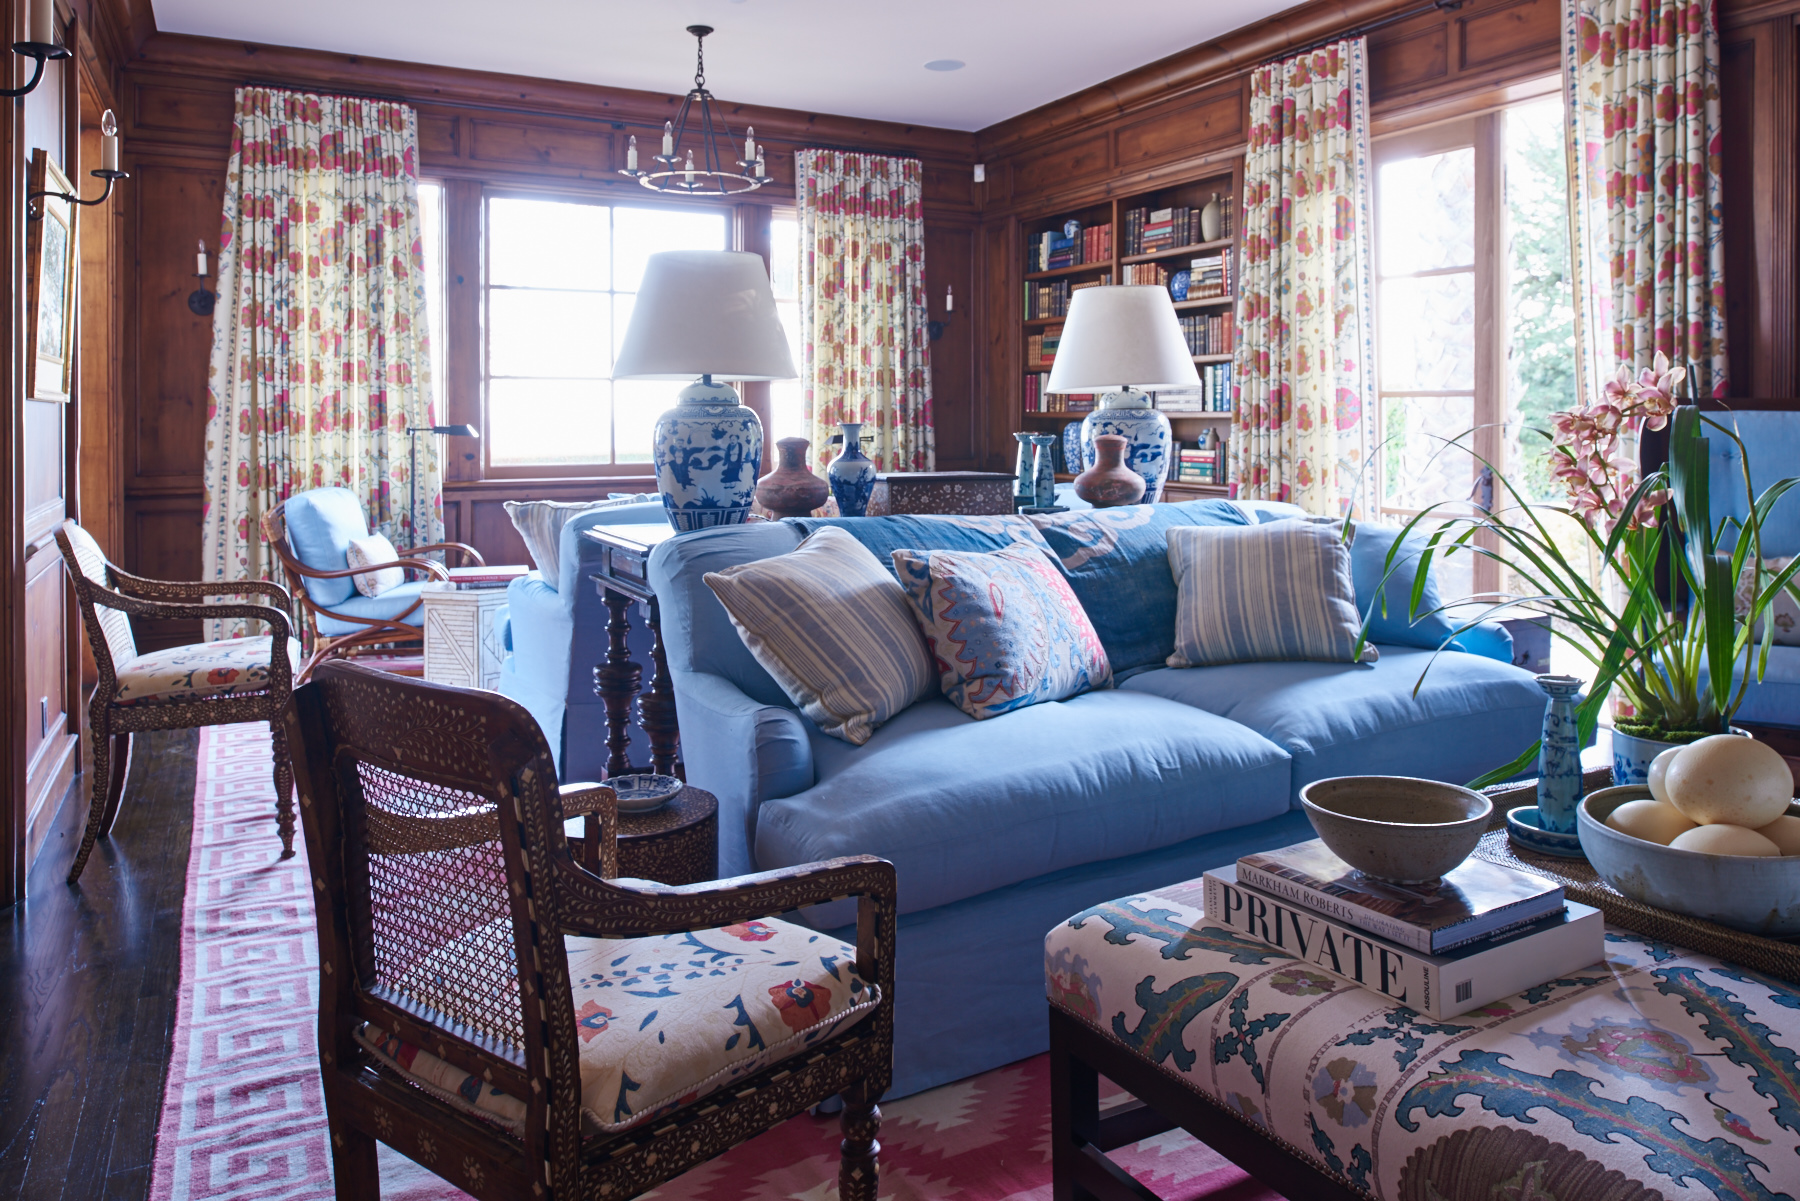 Blue upholstered sofa and chairs with red patterned drapery in the library